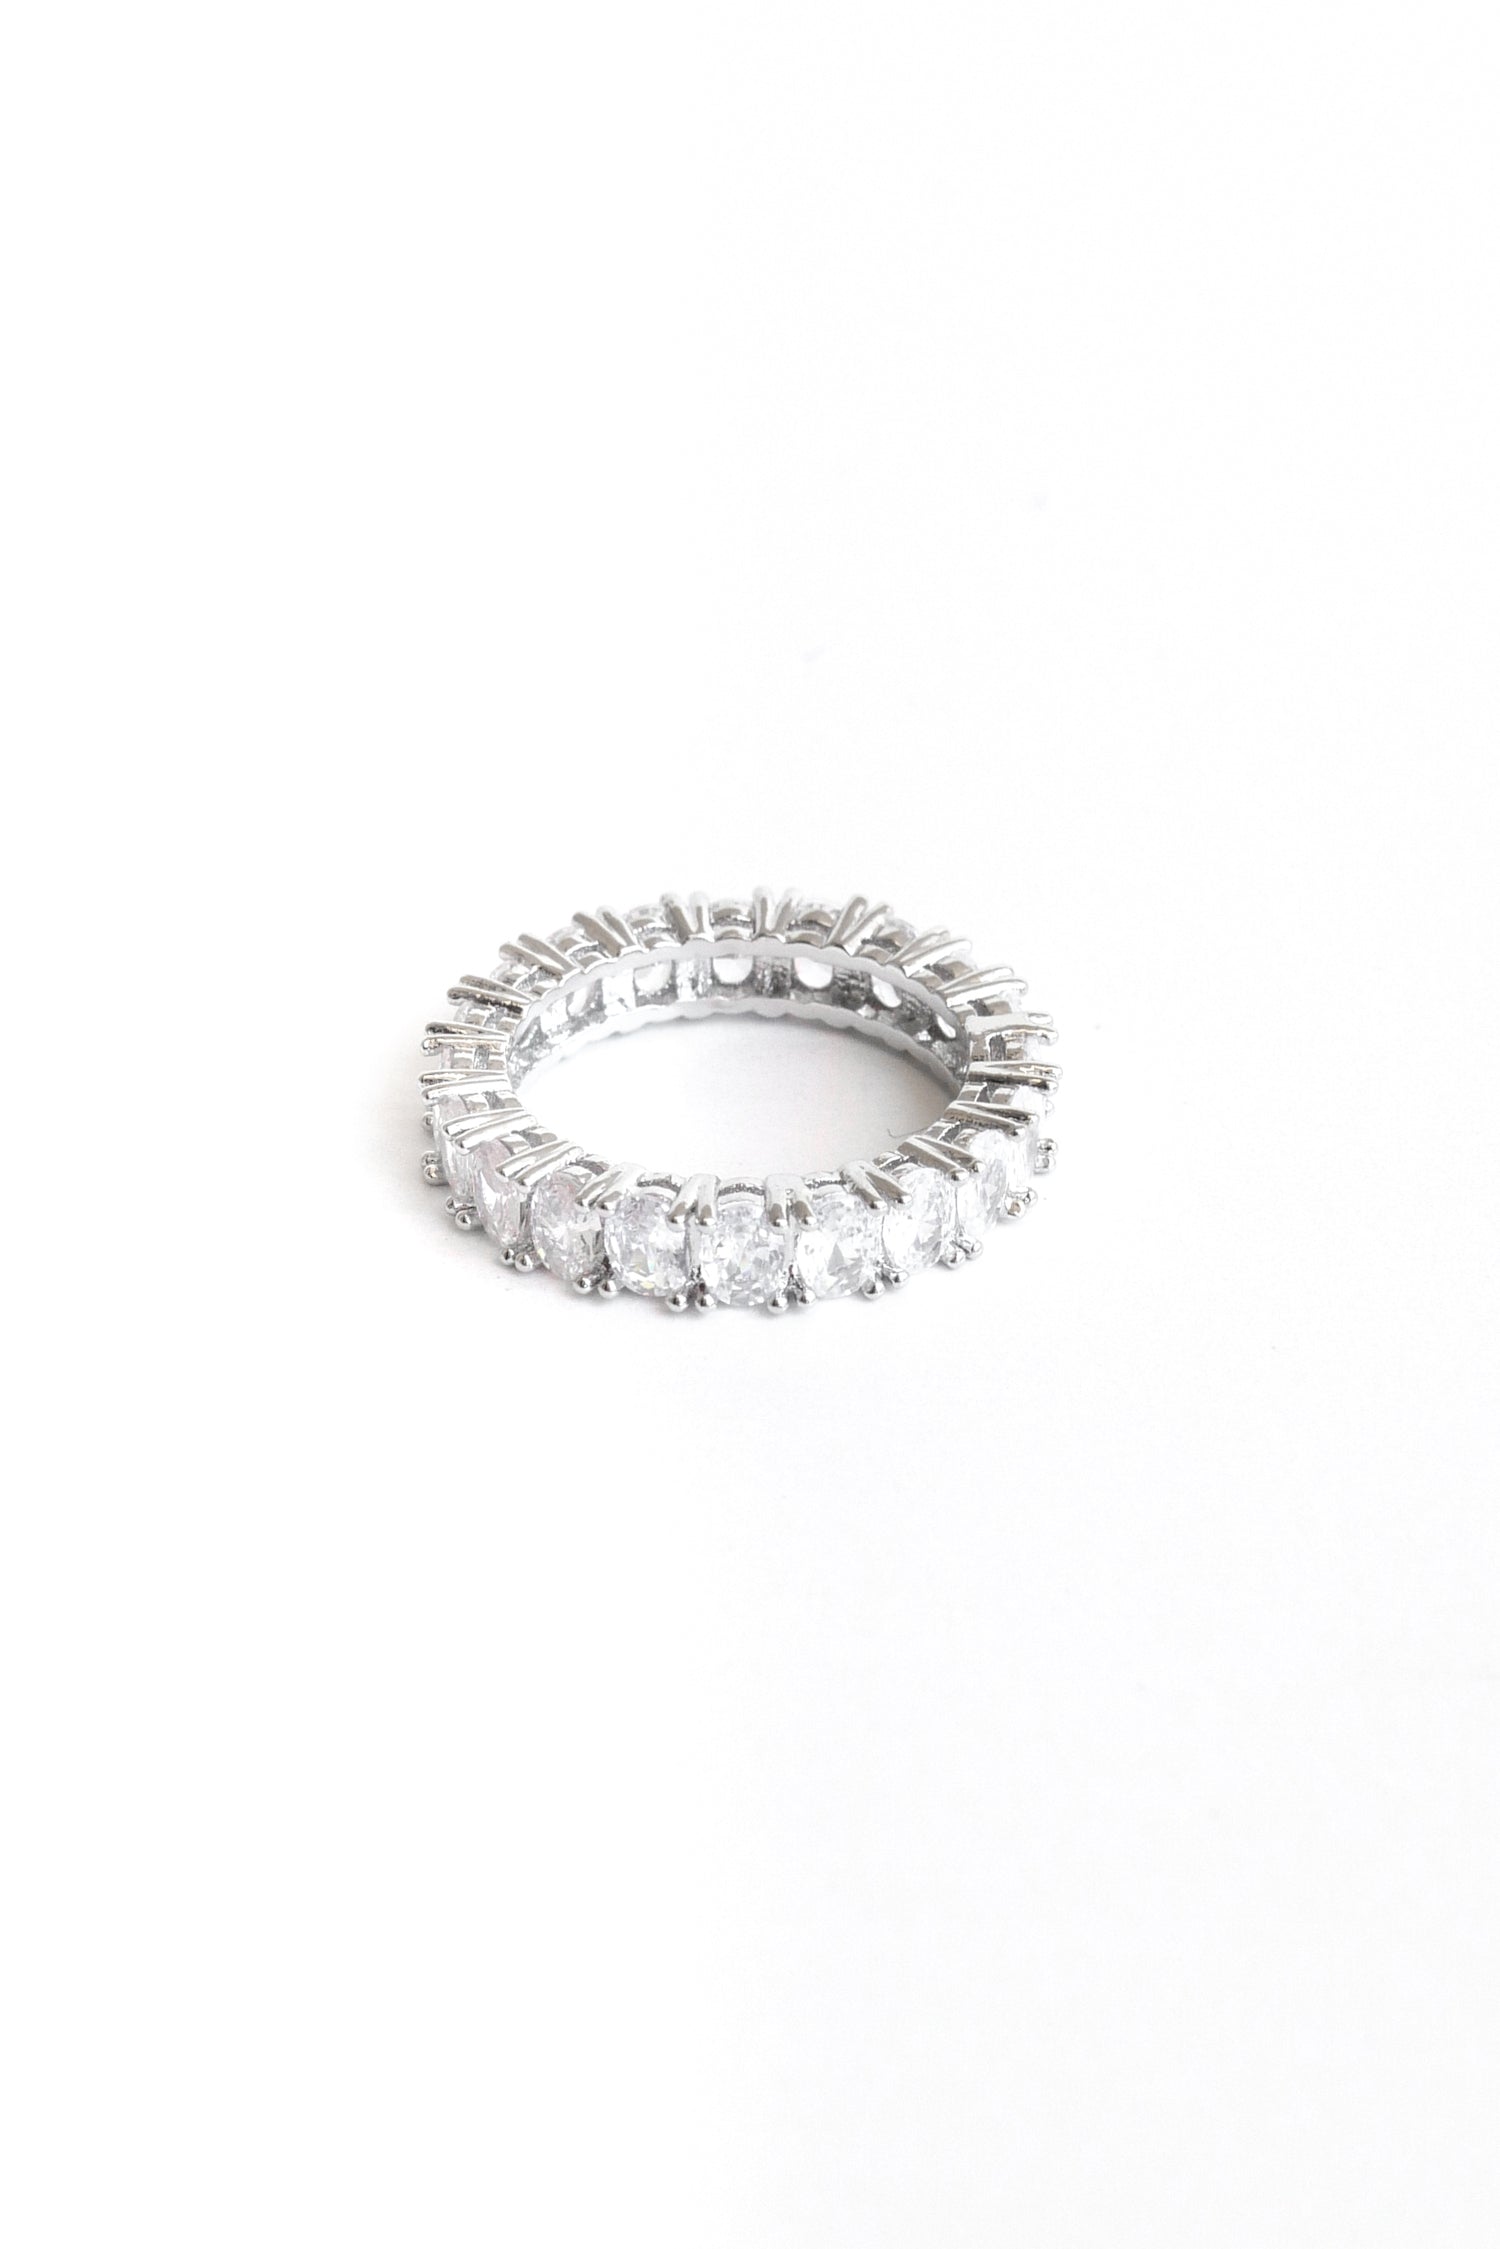 Oval Amor band ring lay flat against a white backdrop